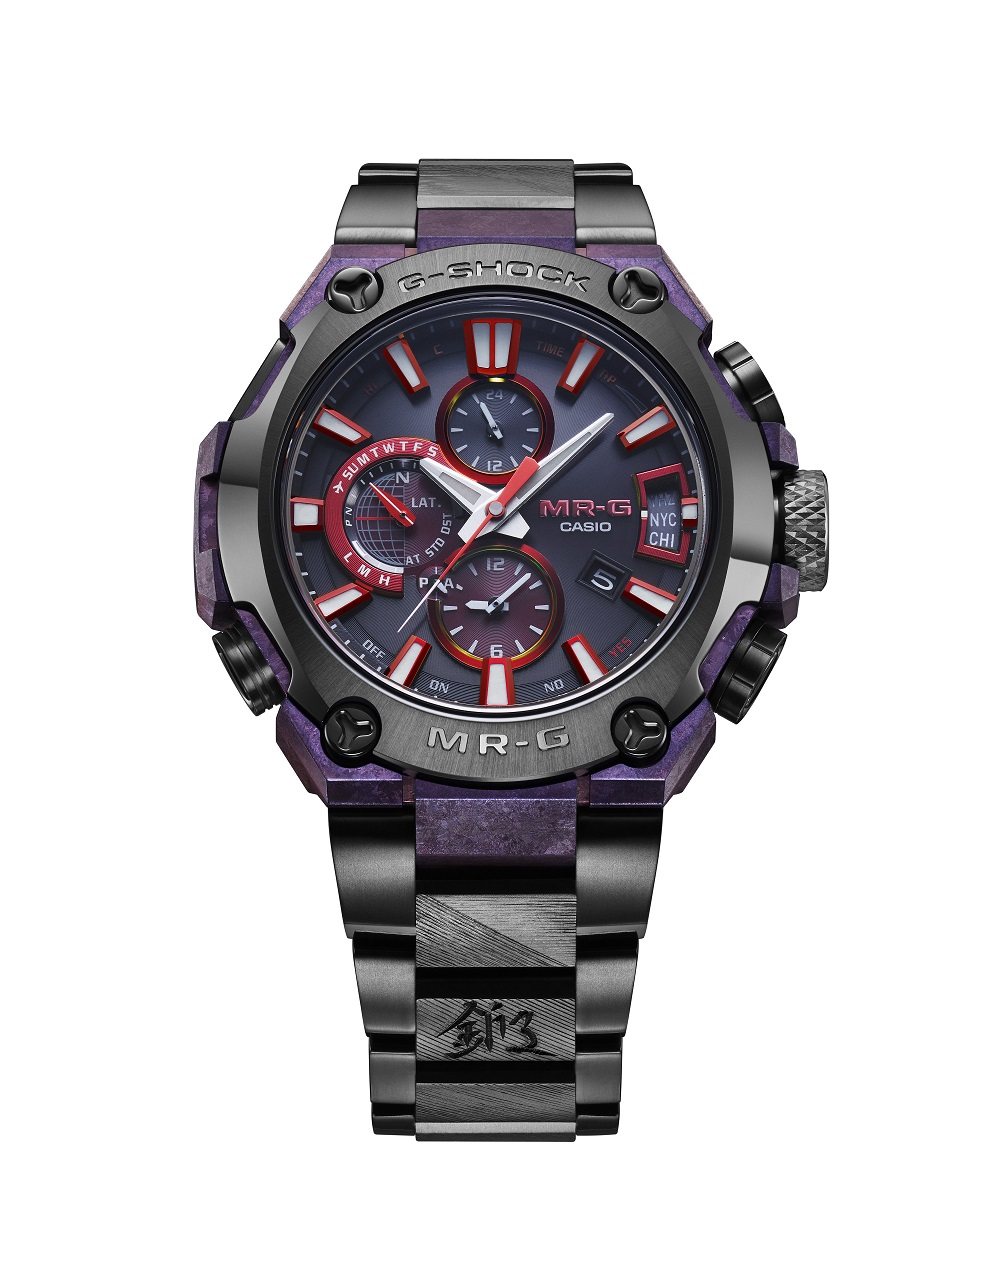 CASIO TO RELEASE G-SHOCK MR-G FINISHED IN GASSAN TRADITION OF JAPANESE